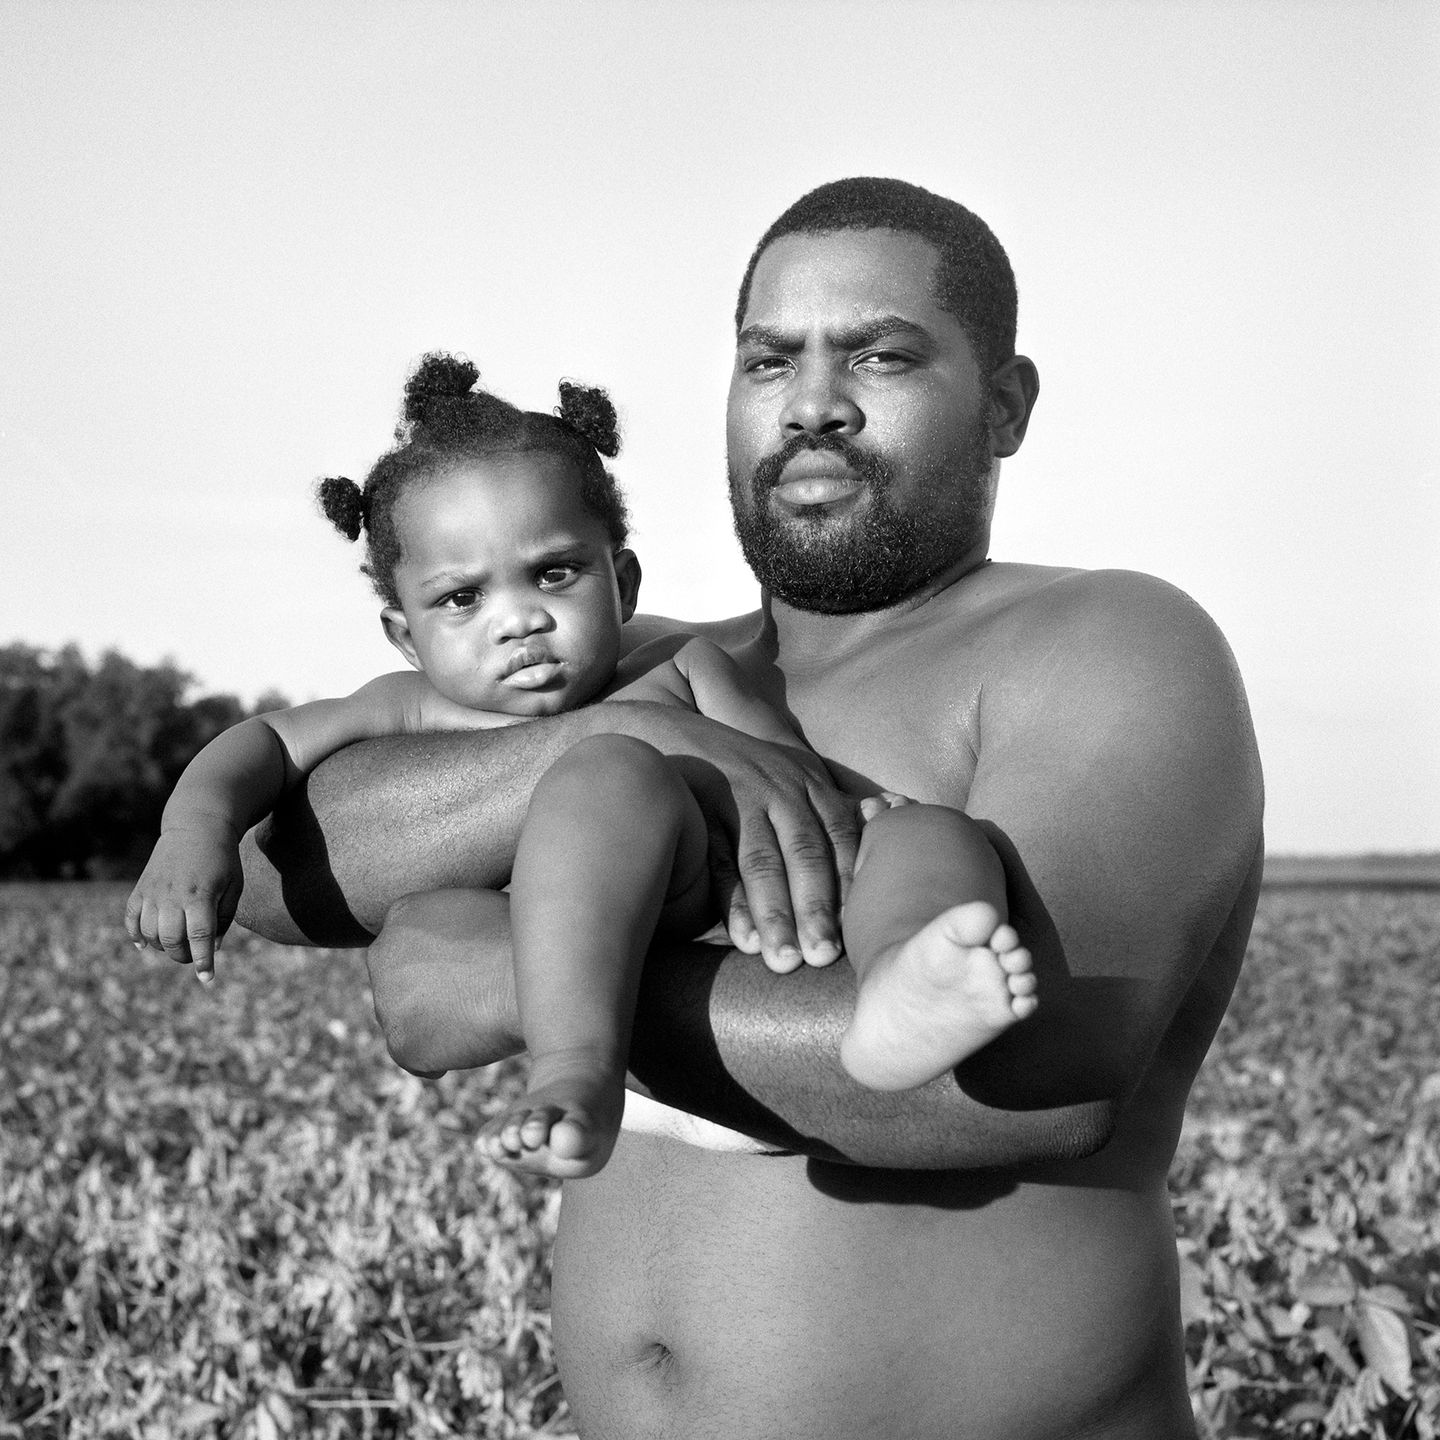 Photos of race and compassion in the Mississippi Delta – The Washington Post